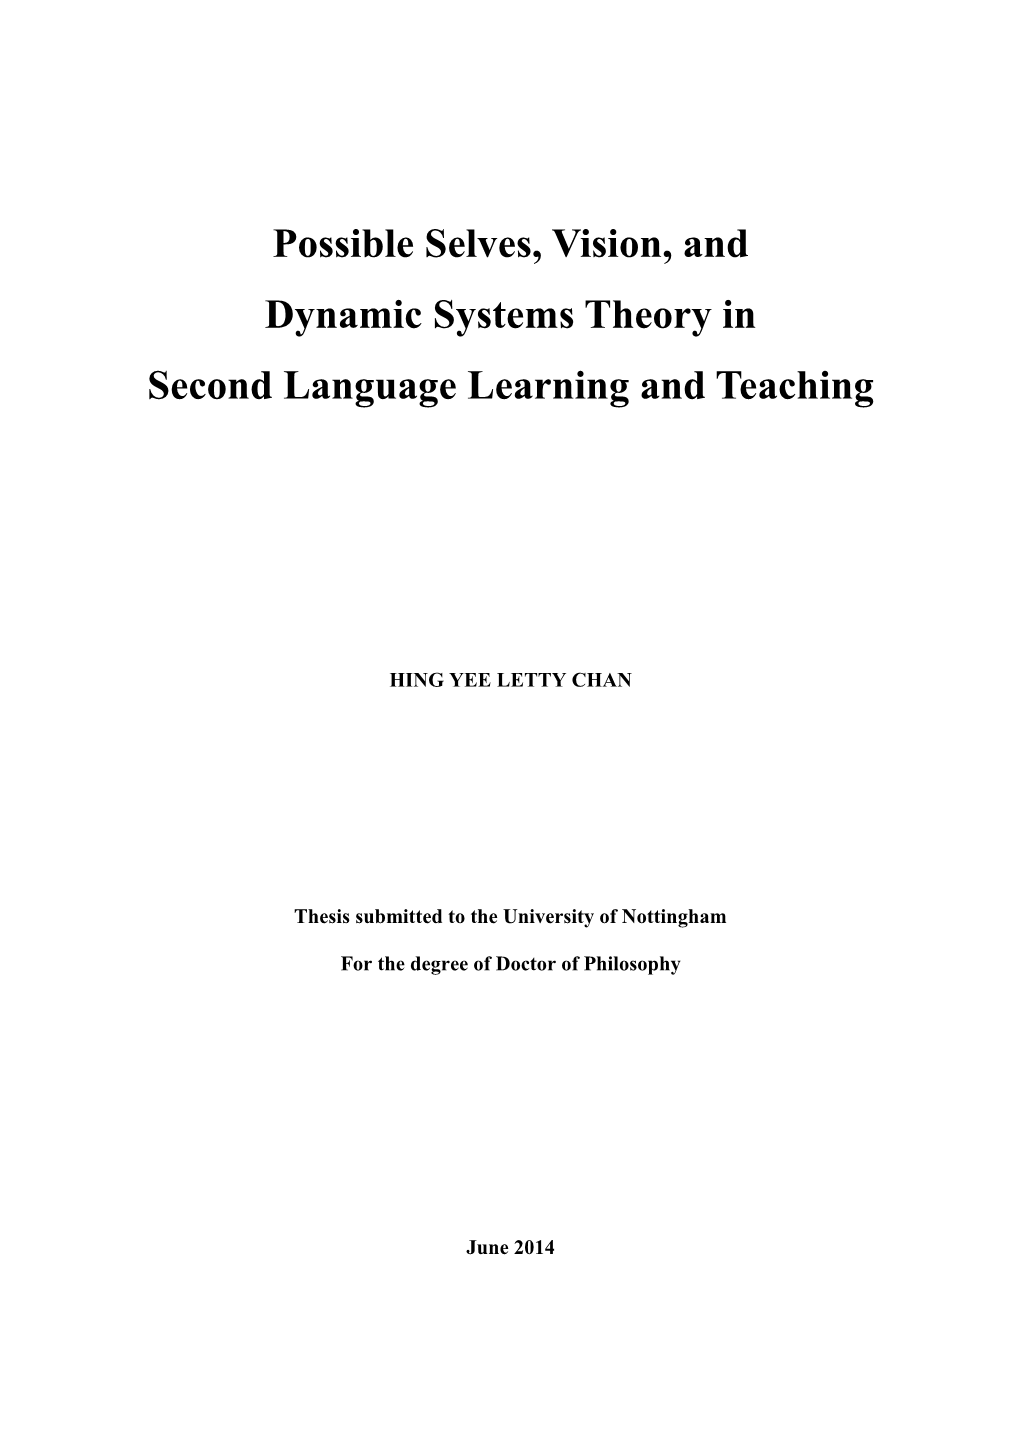 Possible Selves, Vision, and Dynamic Systems Theory in Second Language Learning and Teaching